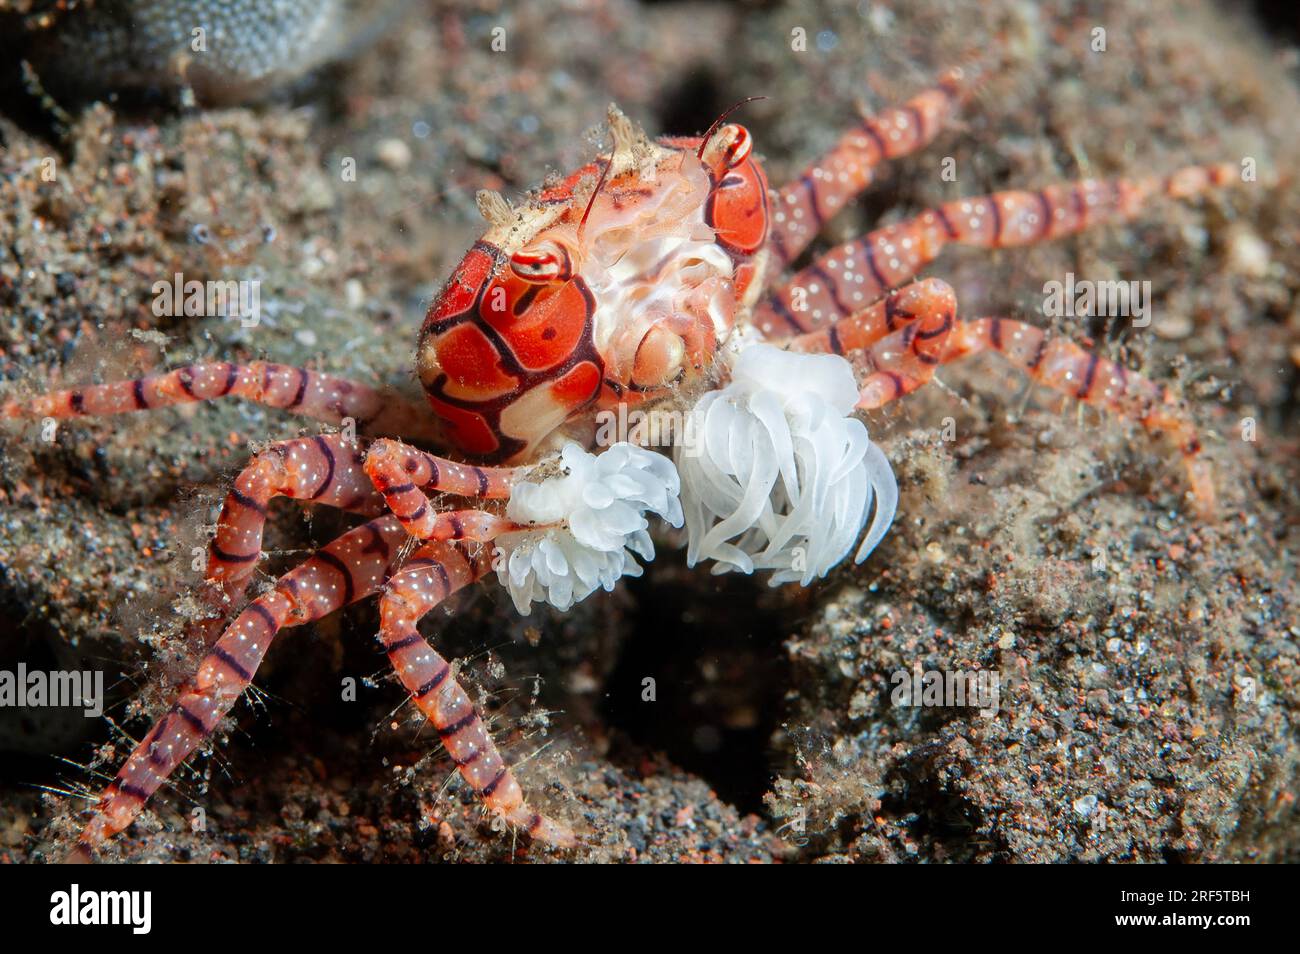 Pom-pom Crab, Lybia tesselata, with eggs holding Anemones, Triactis producta, in modified chelae for protection, Scuba Seraya House Reef dive site Stock Photo